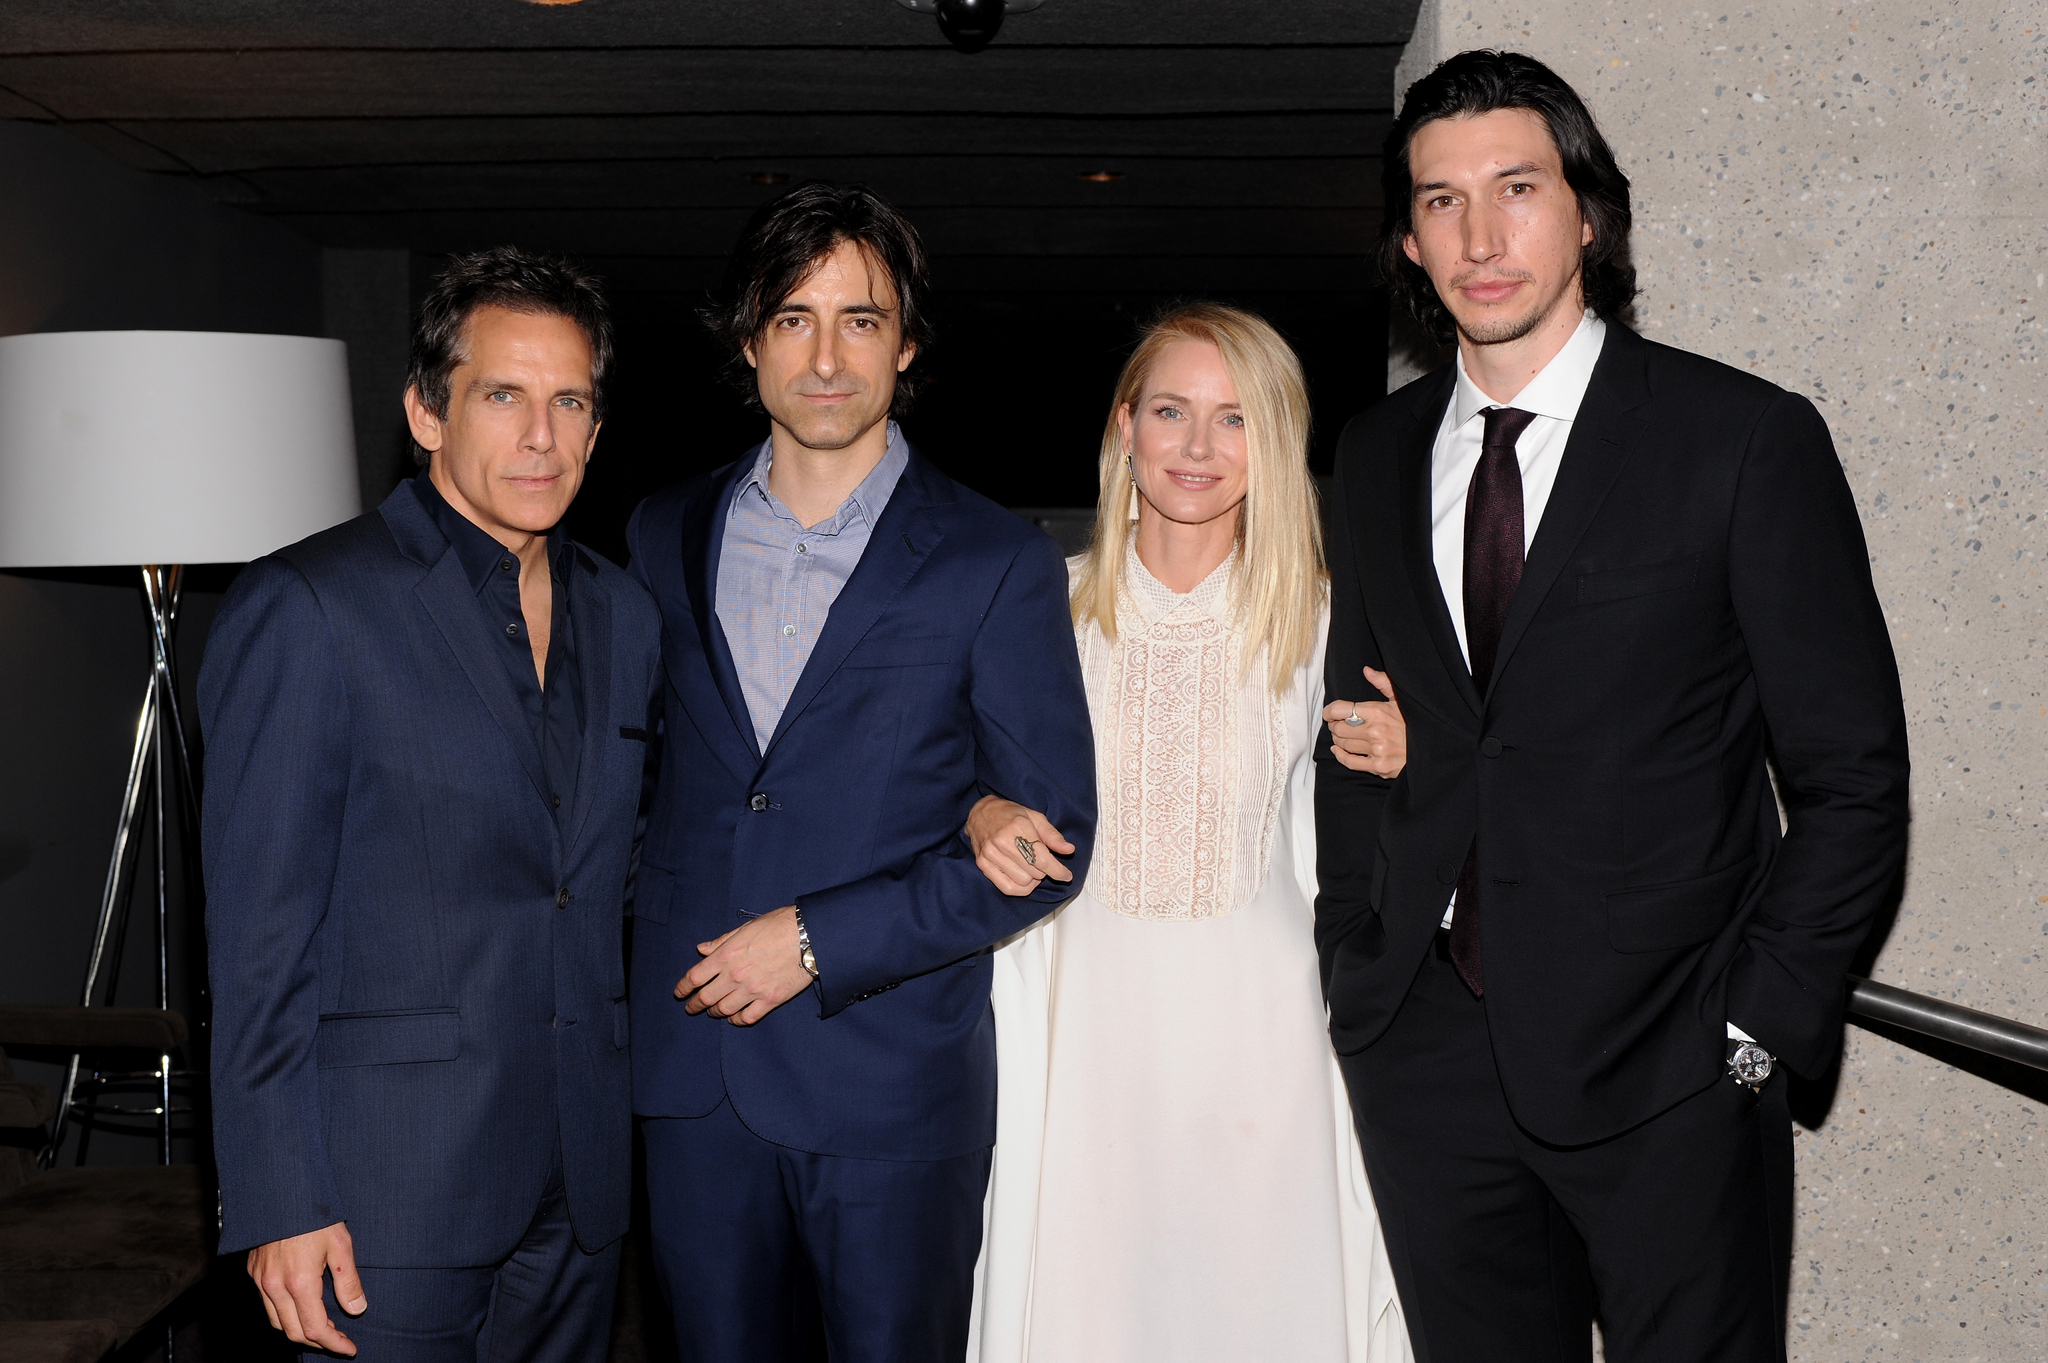 Noah Baumbach, Ben Stiller, Naomi Watts and Adam Driver at event of While We're Young (2014)